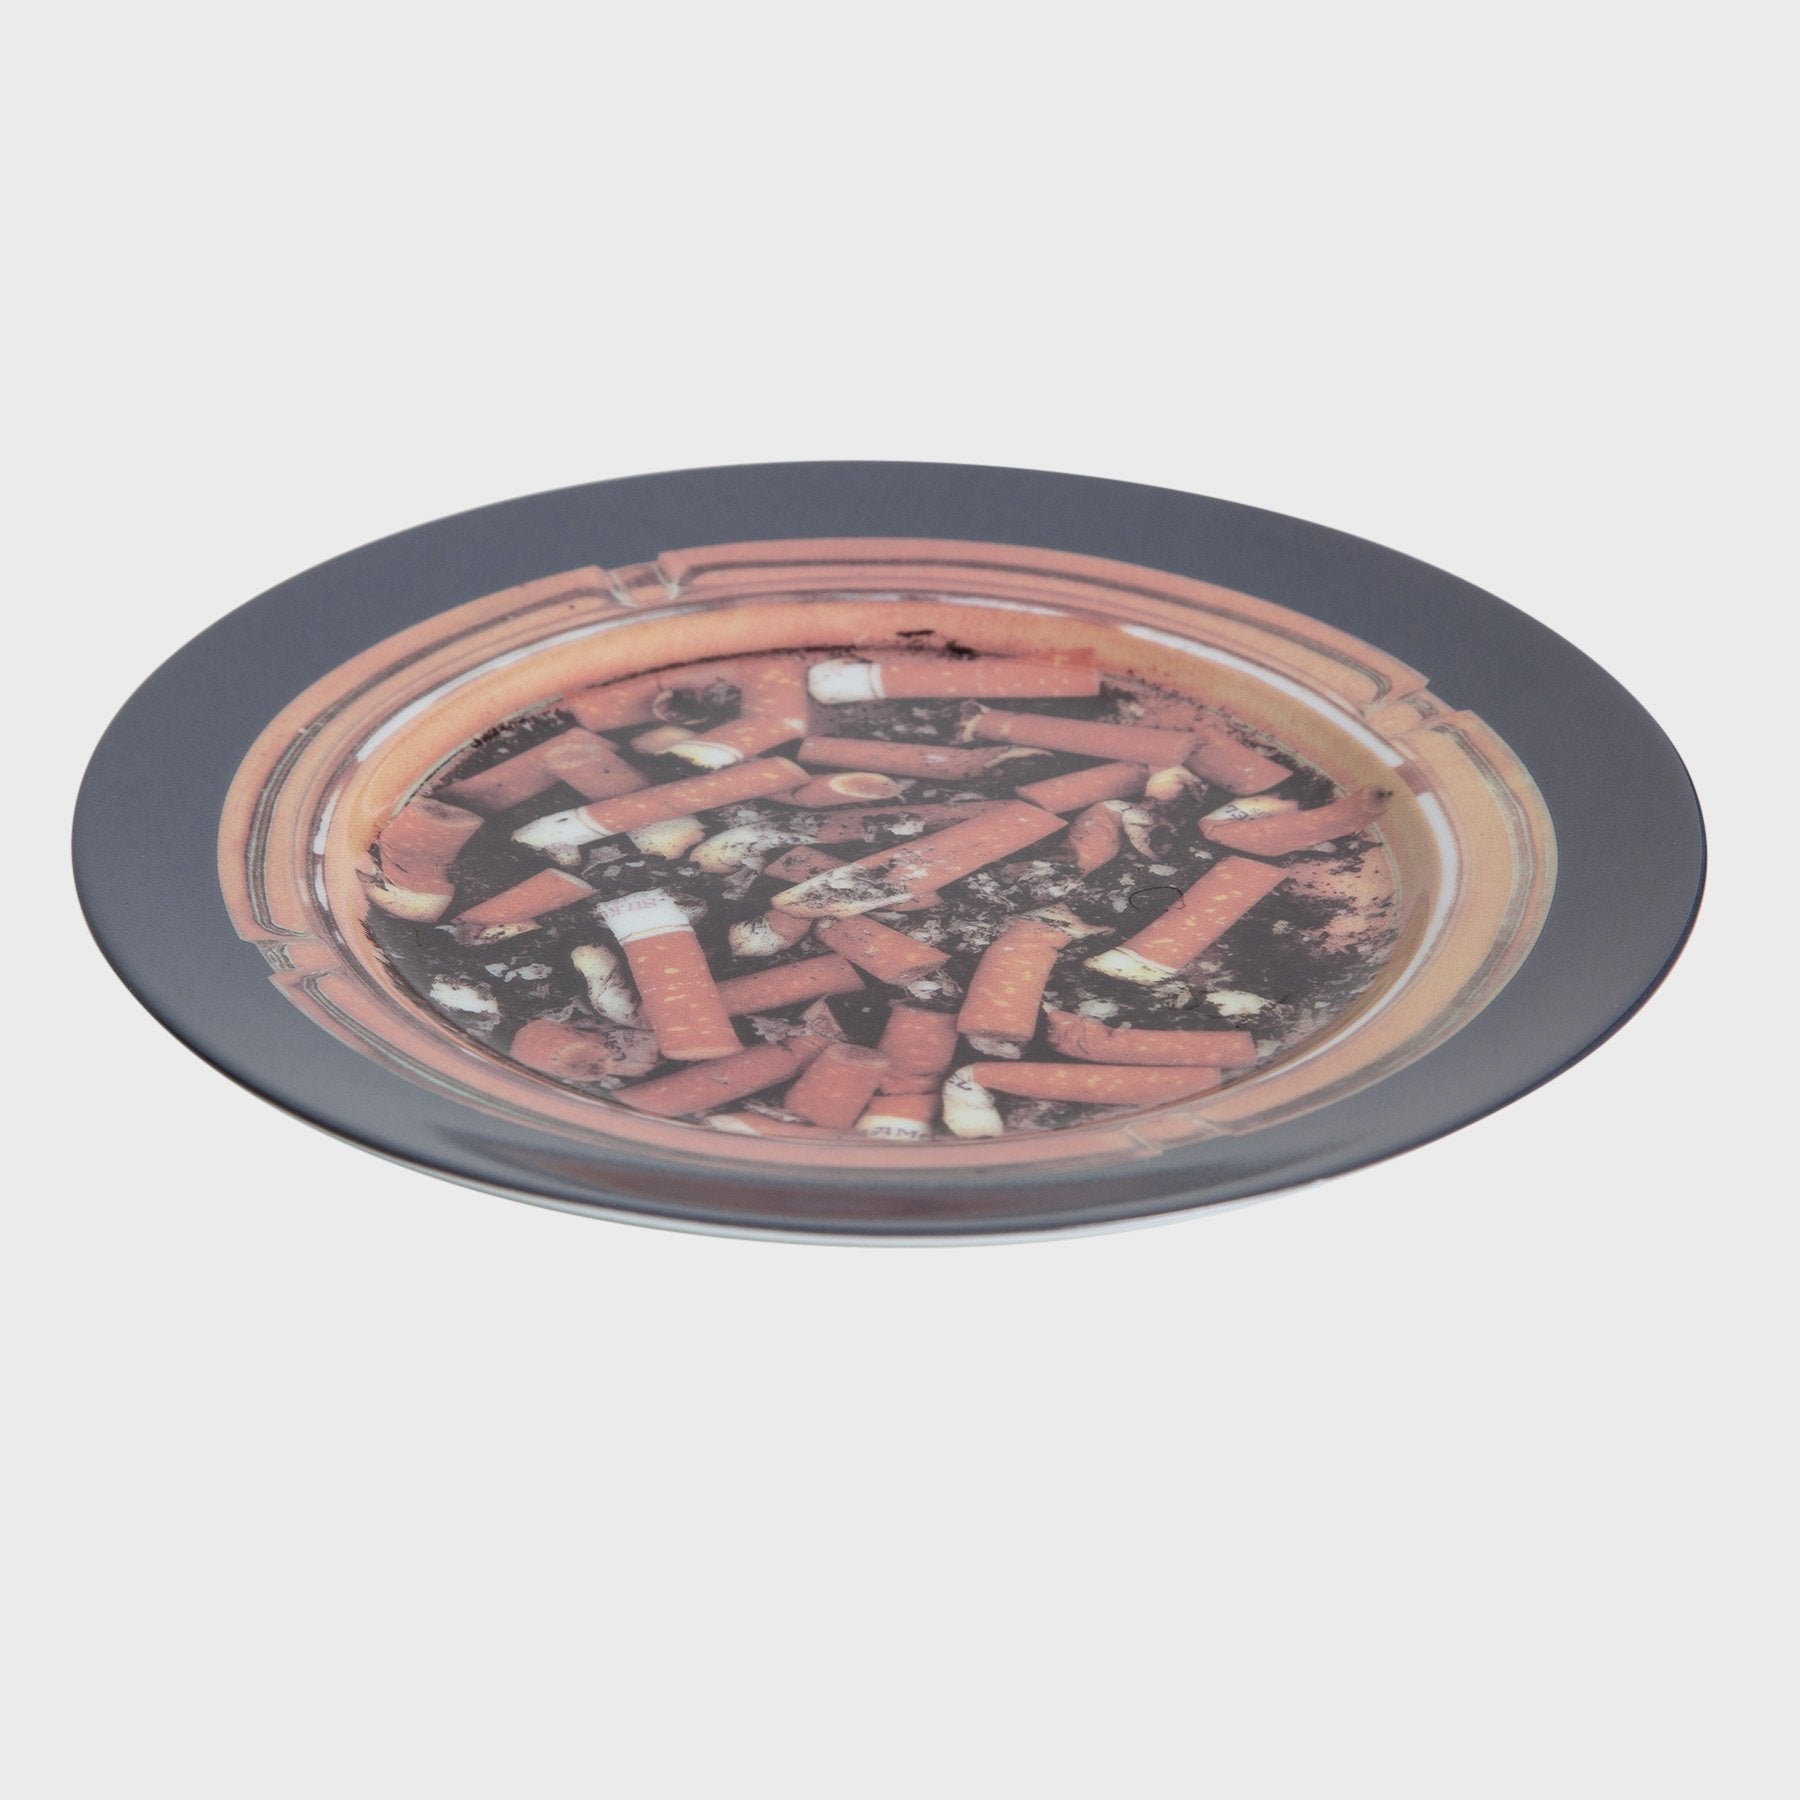 MAXFIELD PRIVATE COLLECTION | 1996 HIRST ASHTRAY PLATE